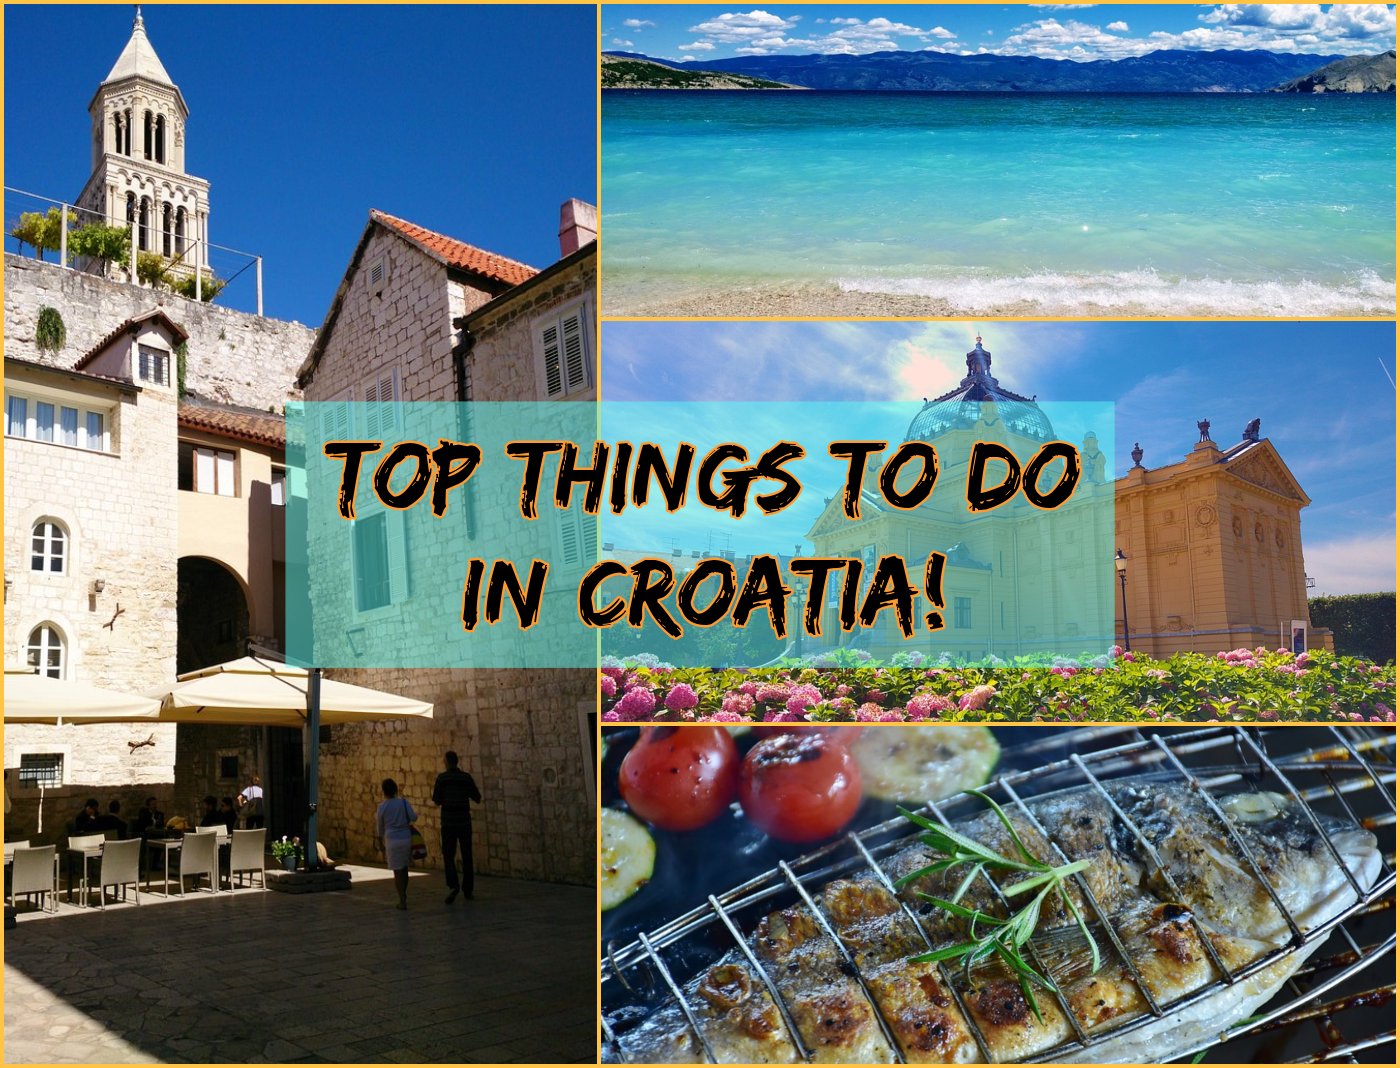 Excursions on Cruise Ships in Split - Things to do